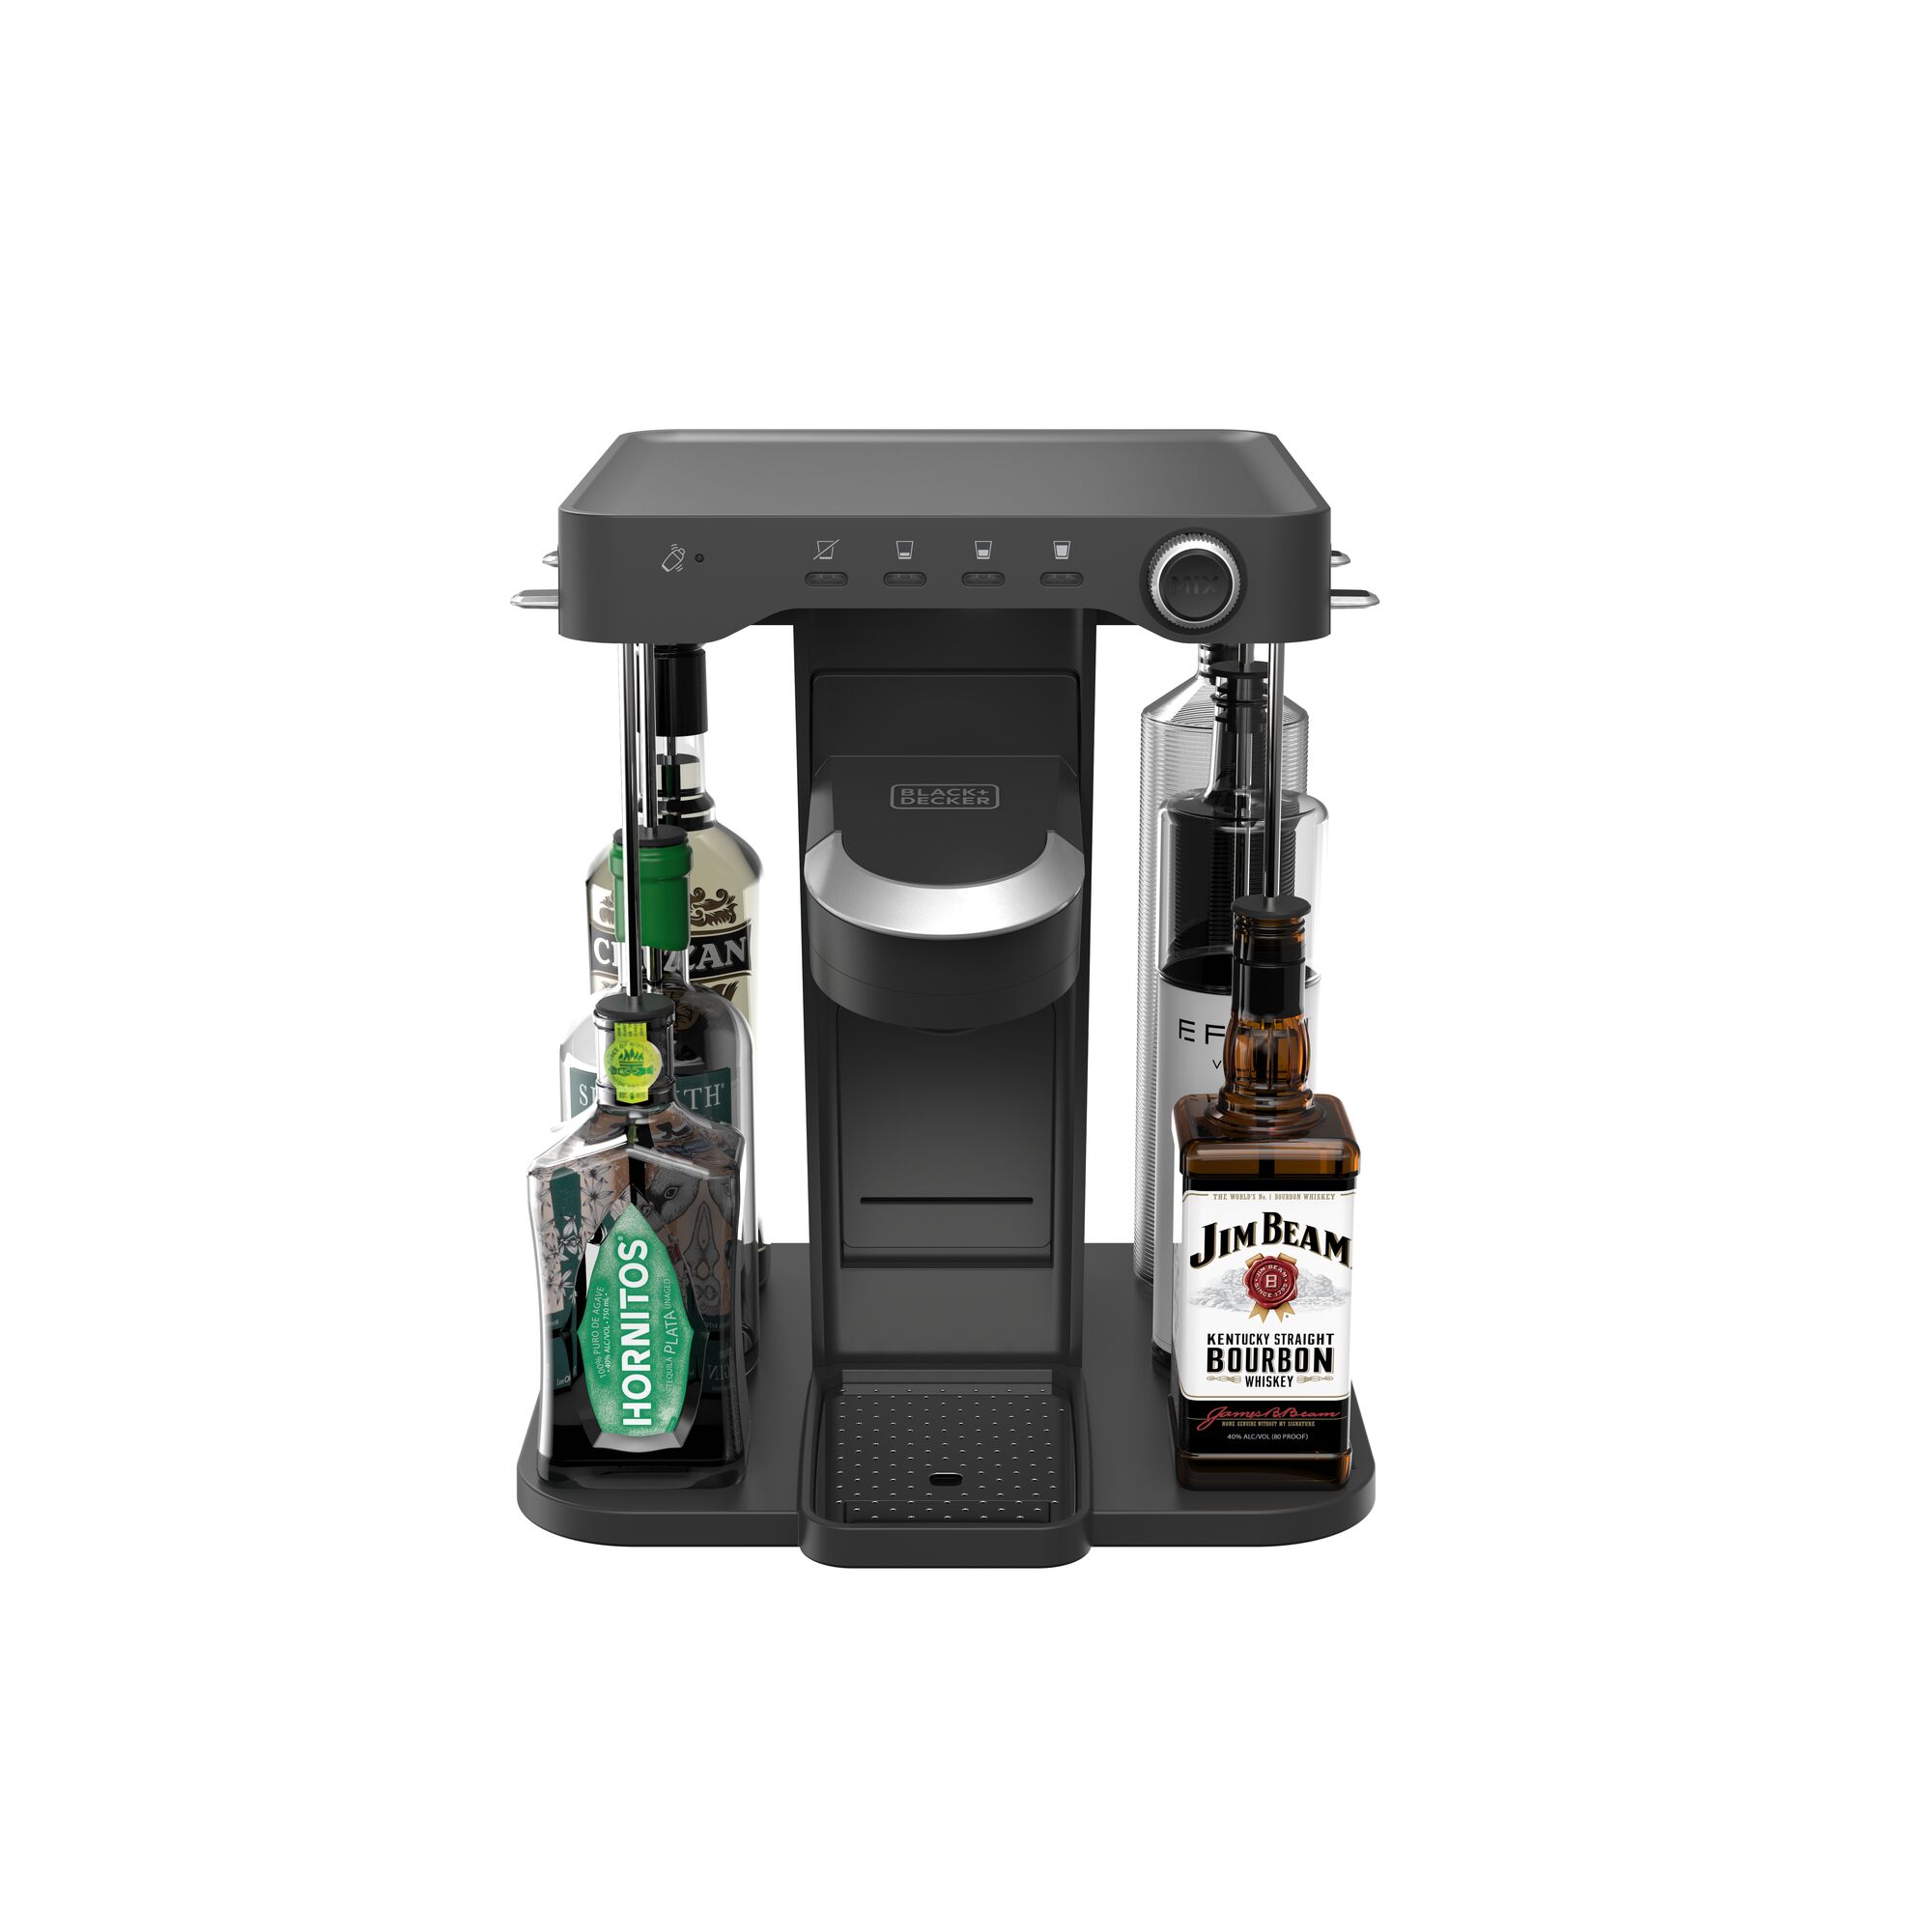 \xbe view of the bev by BLACK+DECKER\u2122 cocktail maker with Jim Beam brand liquor bottles